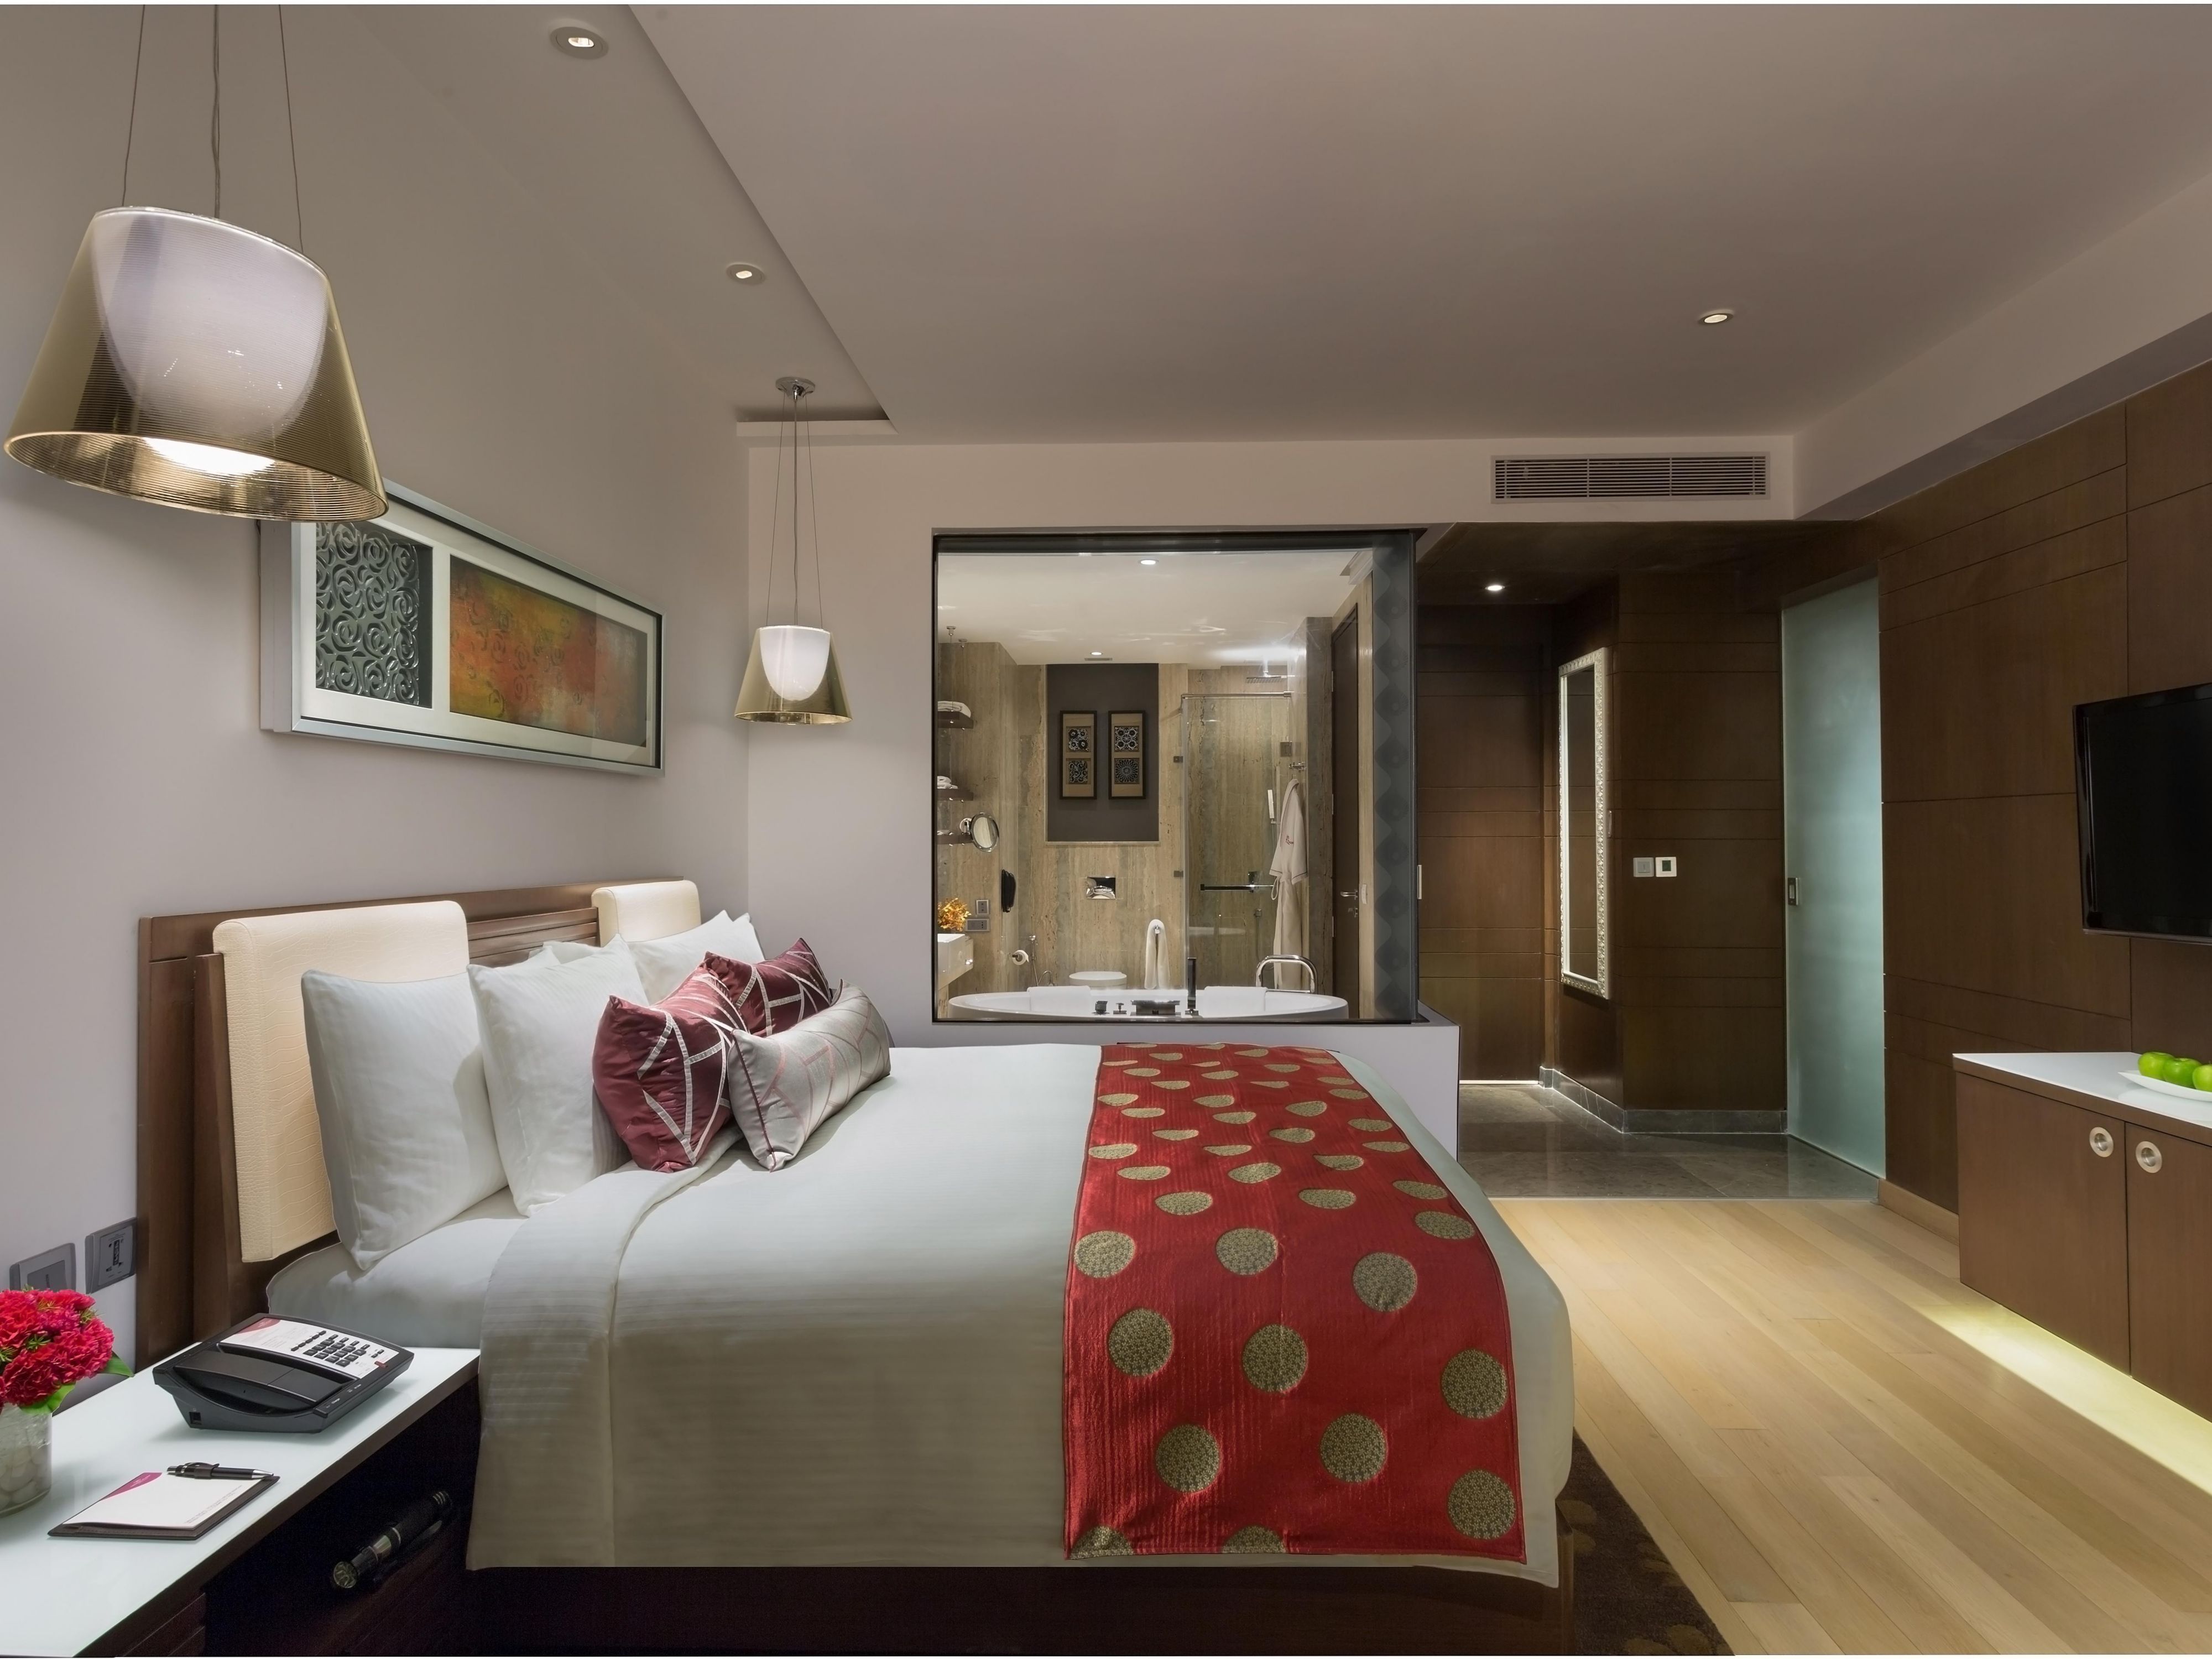 Enjoy a luxurious stay at the spacious and tastefully designed apartments and suites at Crowne Plaza Greater Noida. The expansive rooms offer a perfect balance of business and pleasure. The separate living area is ideal for entertaining guest while the private bedroom can be closed for complete privacy. Apartments also offer a kitchenette.